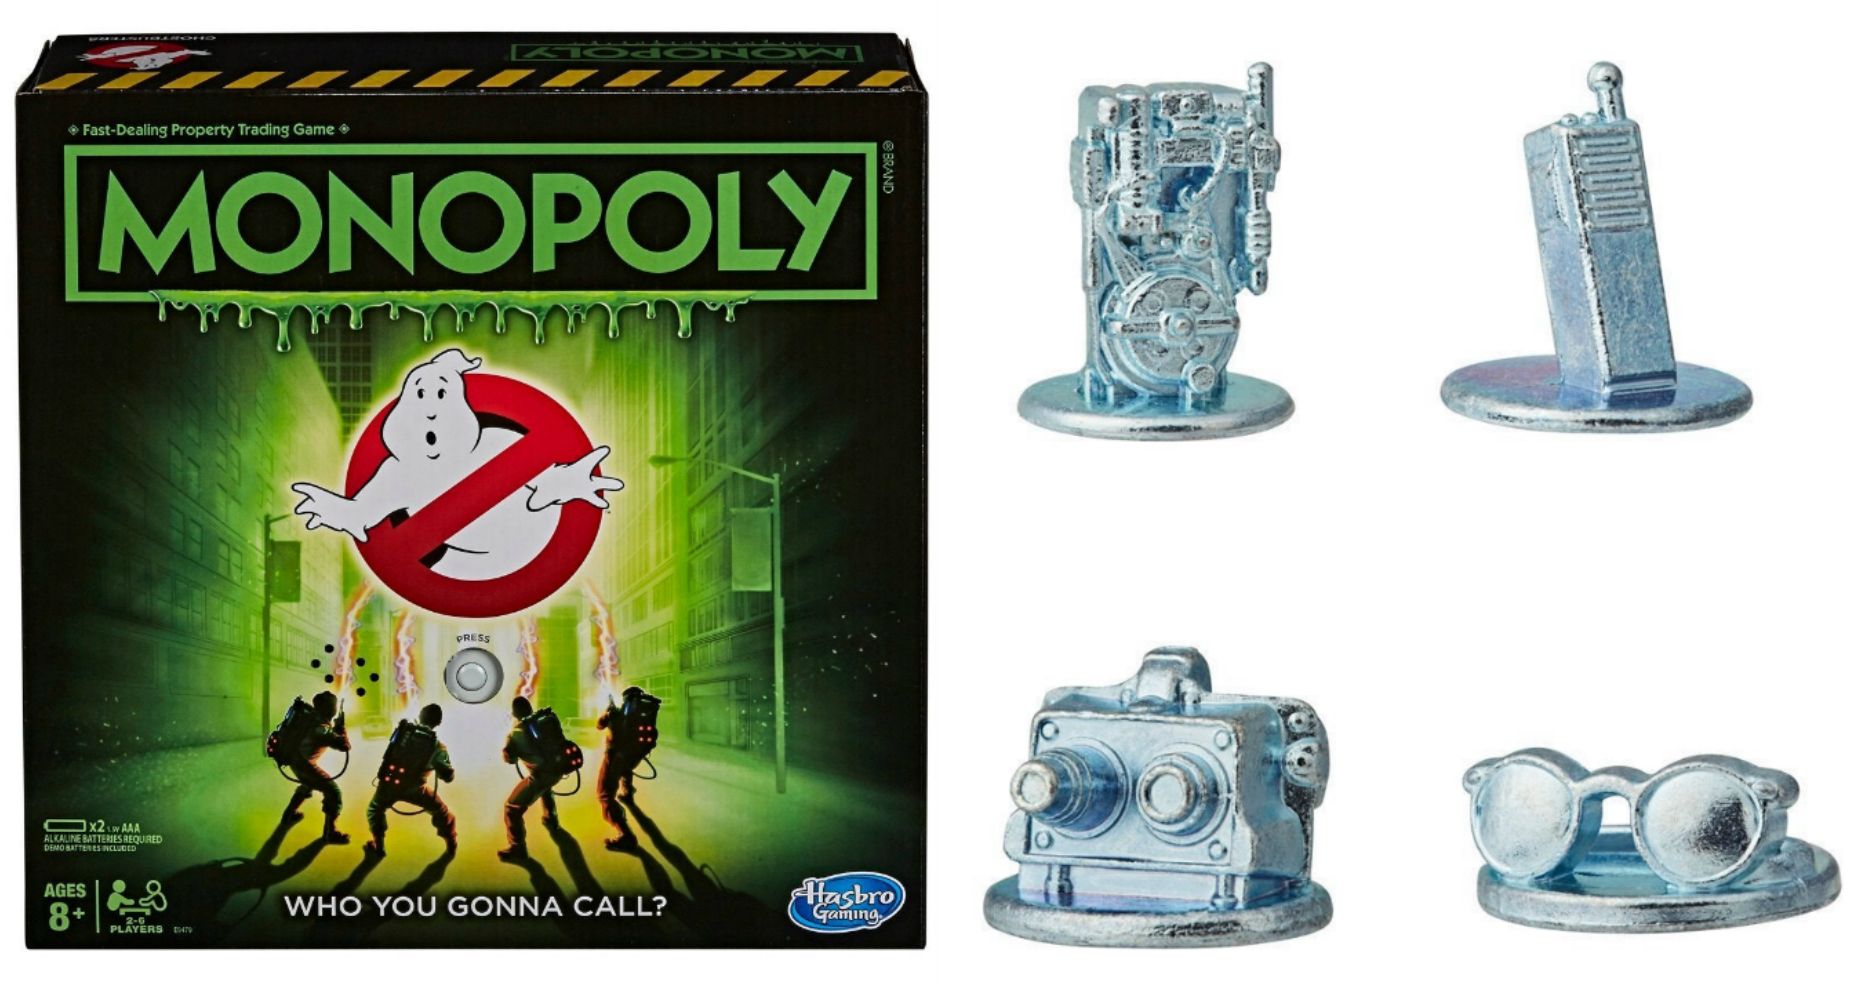 Upgraded Ghostbusters Monopoly Game Hits Stores This Weekend from Hasbro